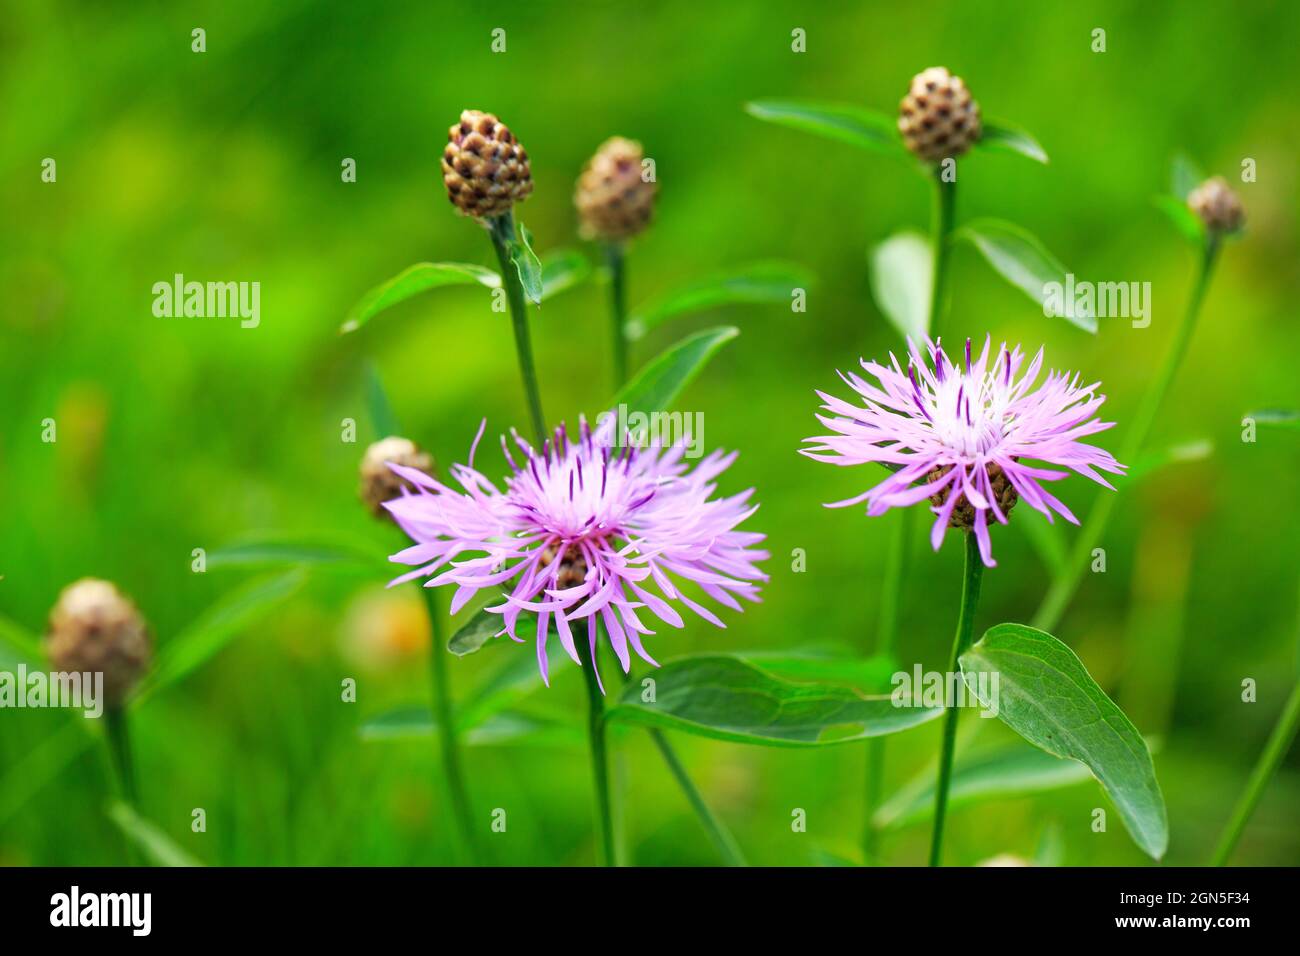 Wild plant with beautiful round purple flowers. Cornflower brown on blurred natural green background. Beautiful natural wallpaper screensaver Stock Photo